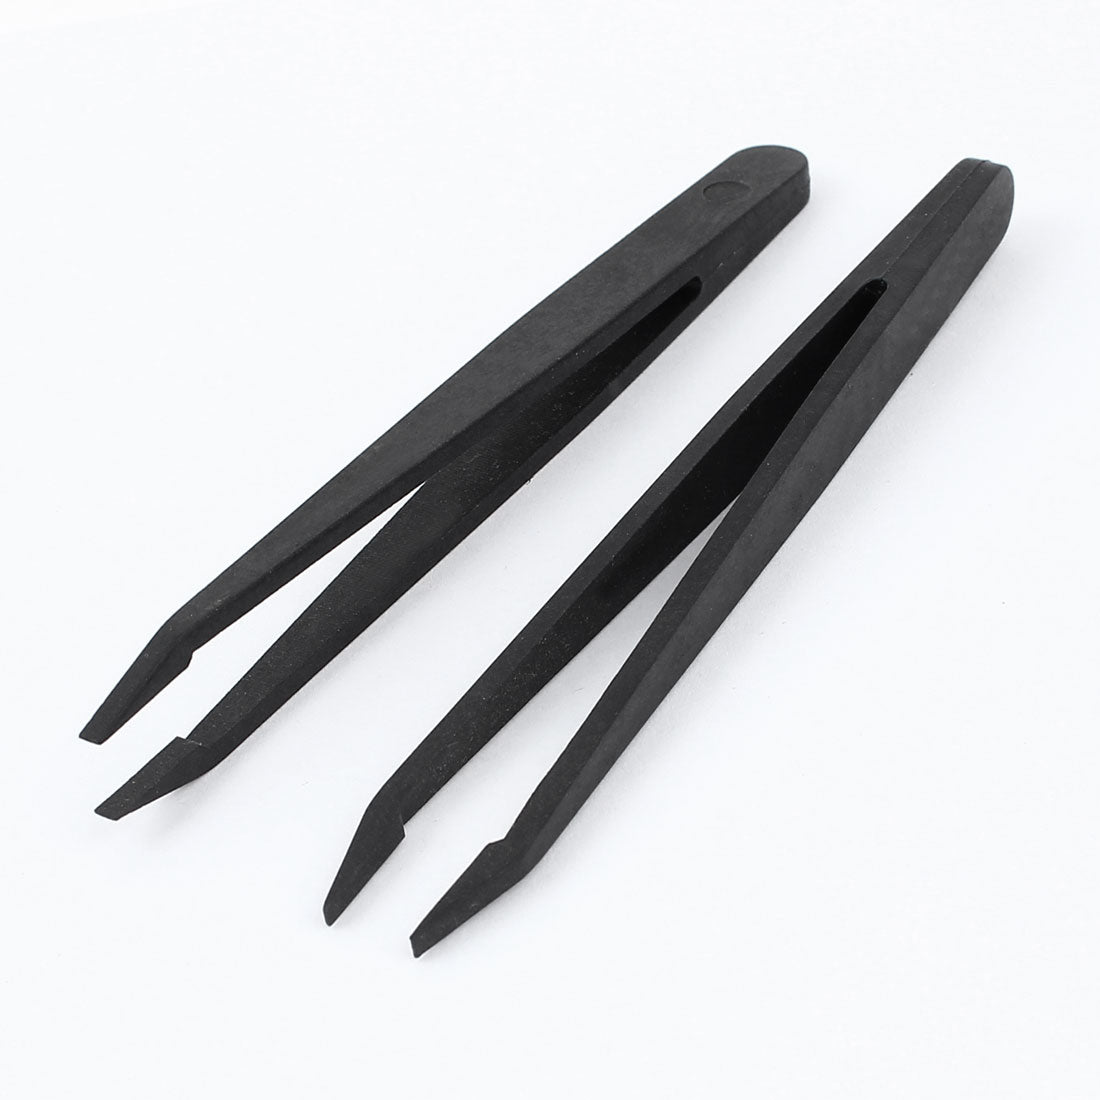 uxcell Uxcell Craft Hobby Precision Tool Black Plastic 2.6mm Tip Anti-static Tweezers 2PCS